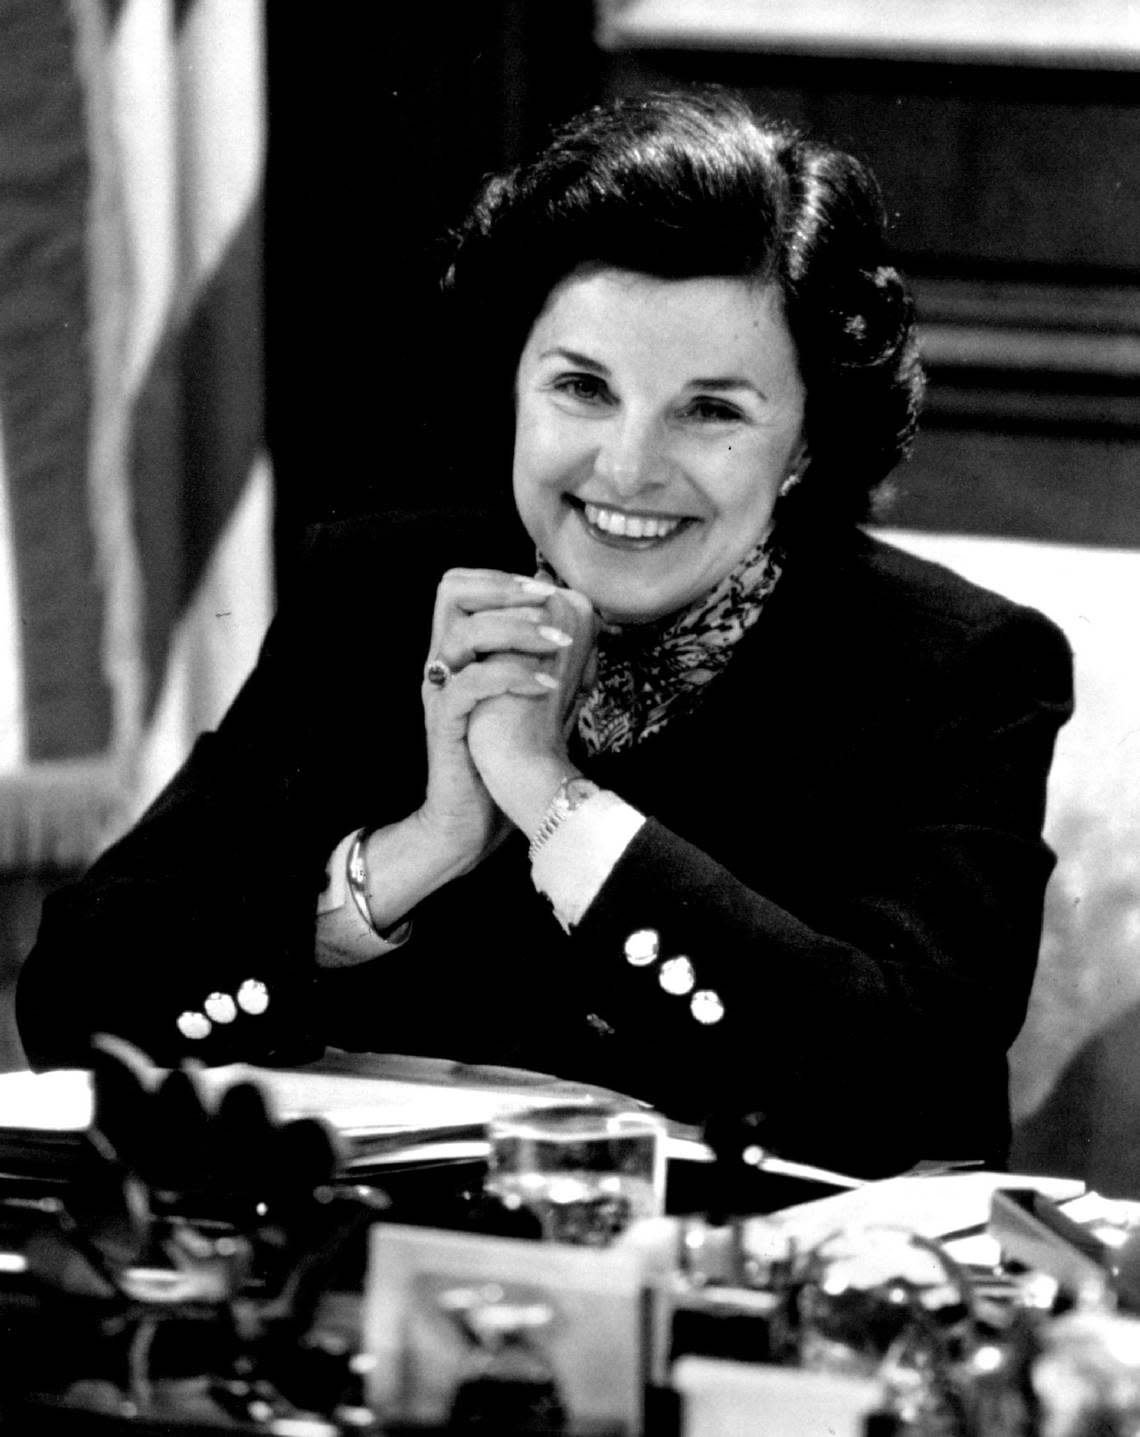 San Francisco Mayor Dianne Feinstein sits in her office on Nov. 27, 1987. With her second term nearing an end and barred by the city charter from seeking a third, she is considered a potential candidate for governor.